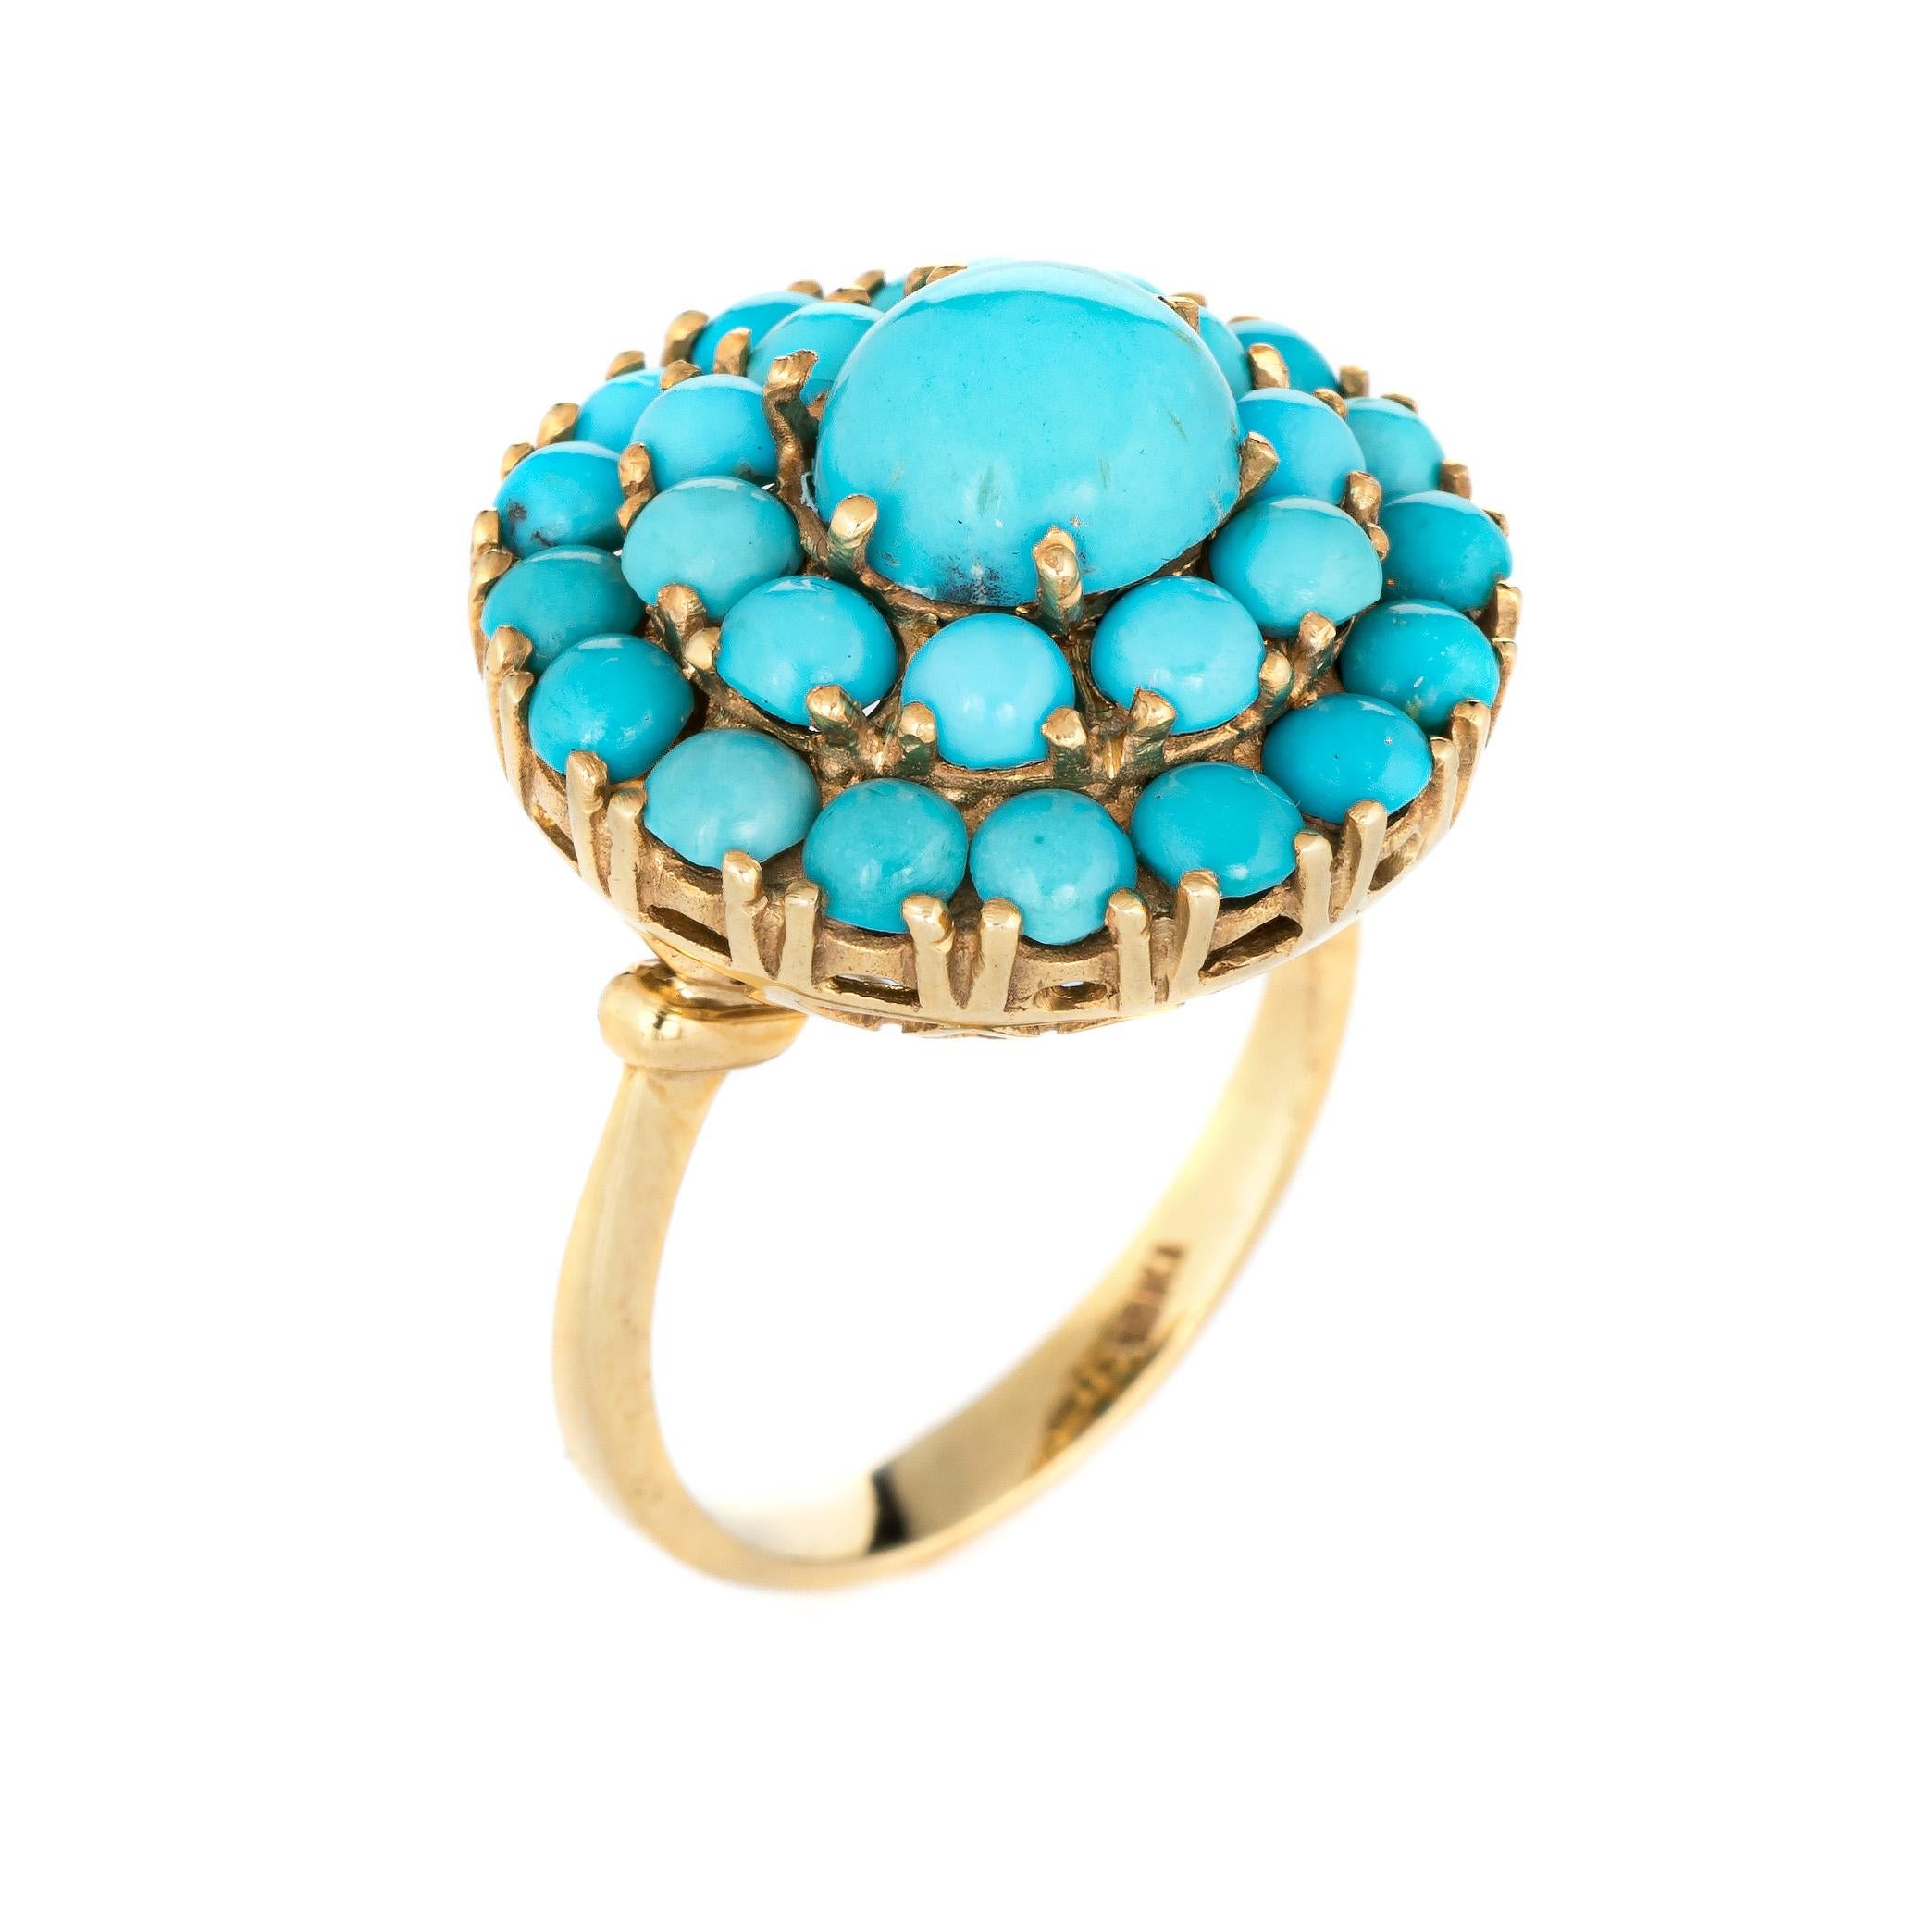 Stylish vintage Persian turquoise cocktail ring (circa 1960s to 1970s) crafted in 18 karat yellow gold. 

Cabochon cut Persian turquoise measures from 3.5mm (two outer rows) to 8.5mm (center). The turquoise is in excellent condition and free of